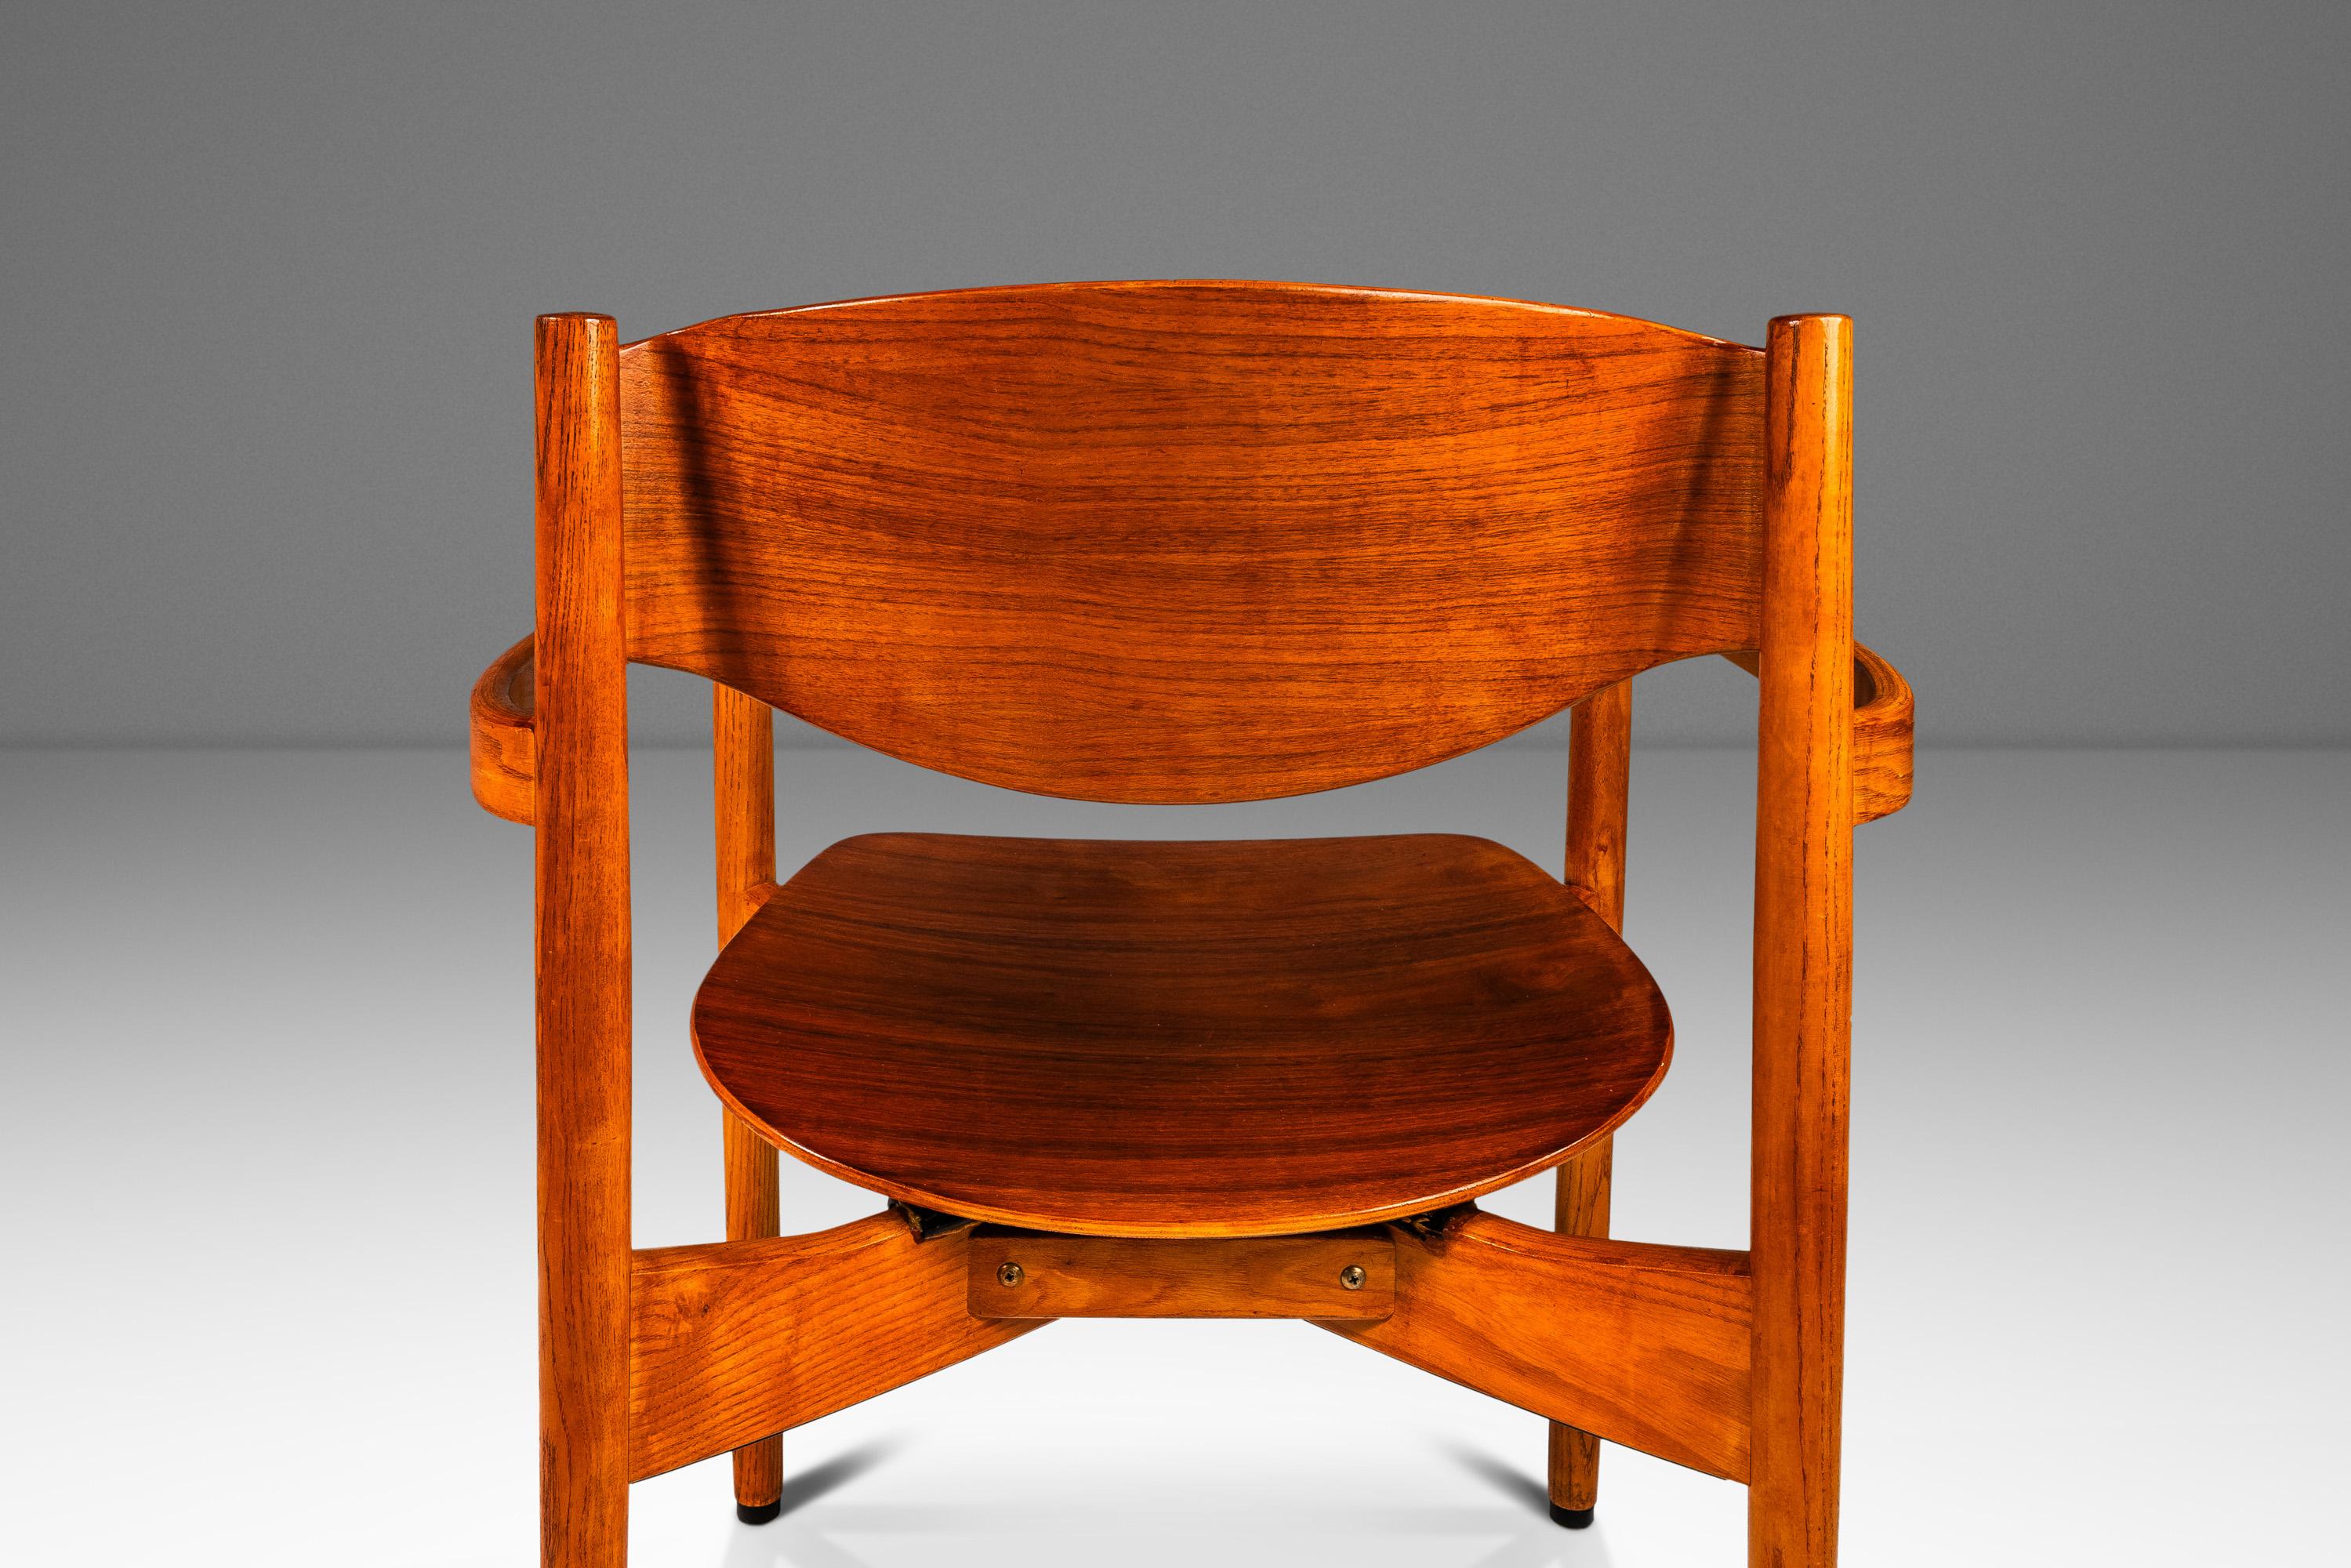 Set of 8 Mid-Century Stacking Chairs: Oak & Walnut, Jens Risom Design, USA, 1960 For Sale 6